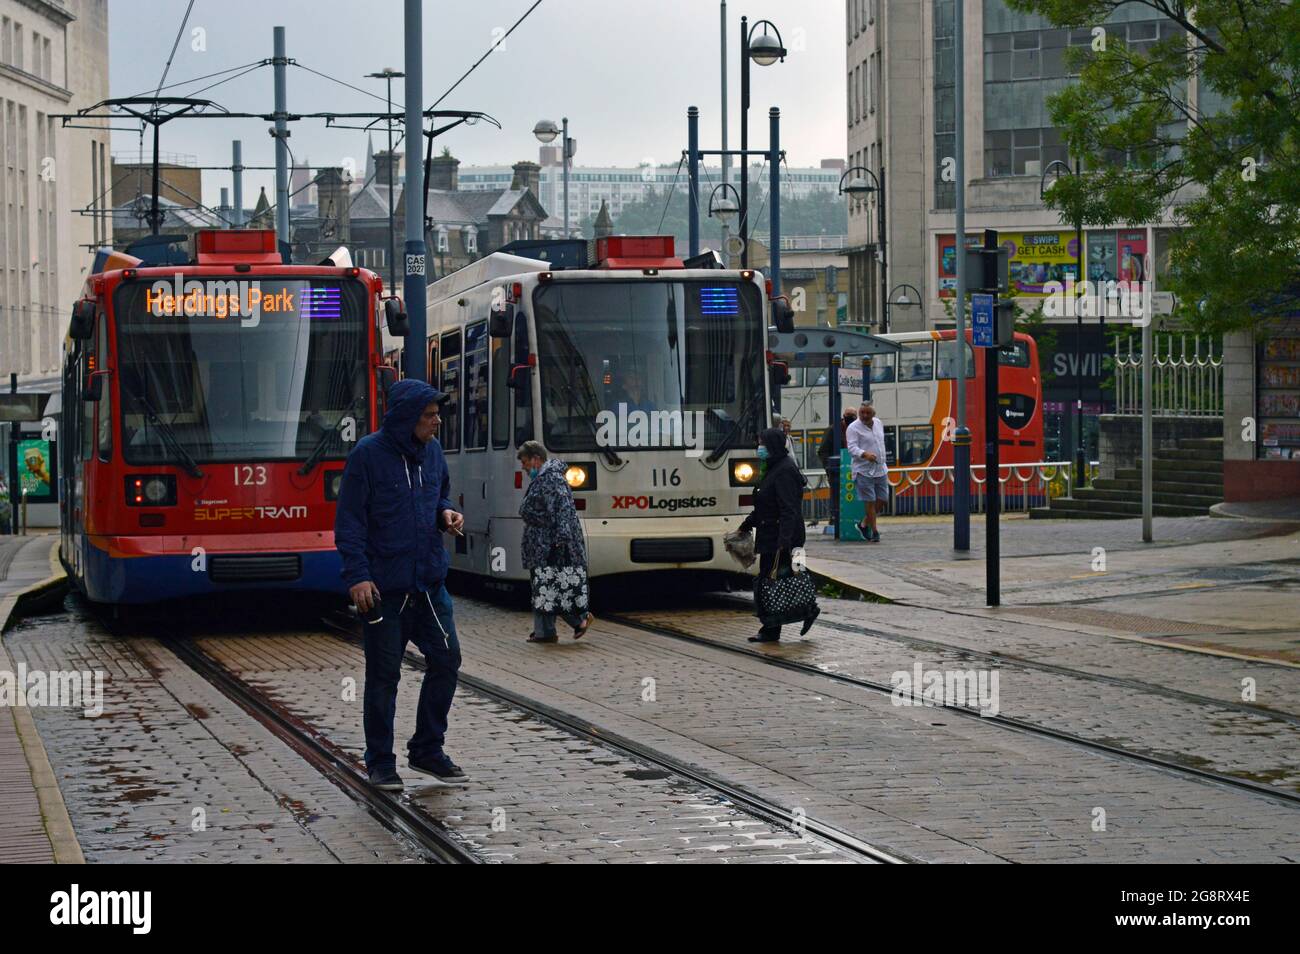 SHEFFIELD. SOUTH YORKSHIRE. ENGLAND. 07-10-21. Fitzalan Square tramstop in the city centre, two trams passing in the rain. Stock Photo